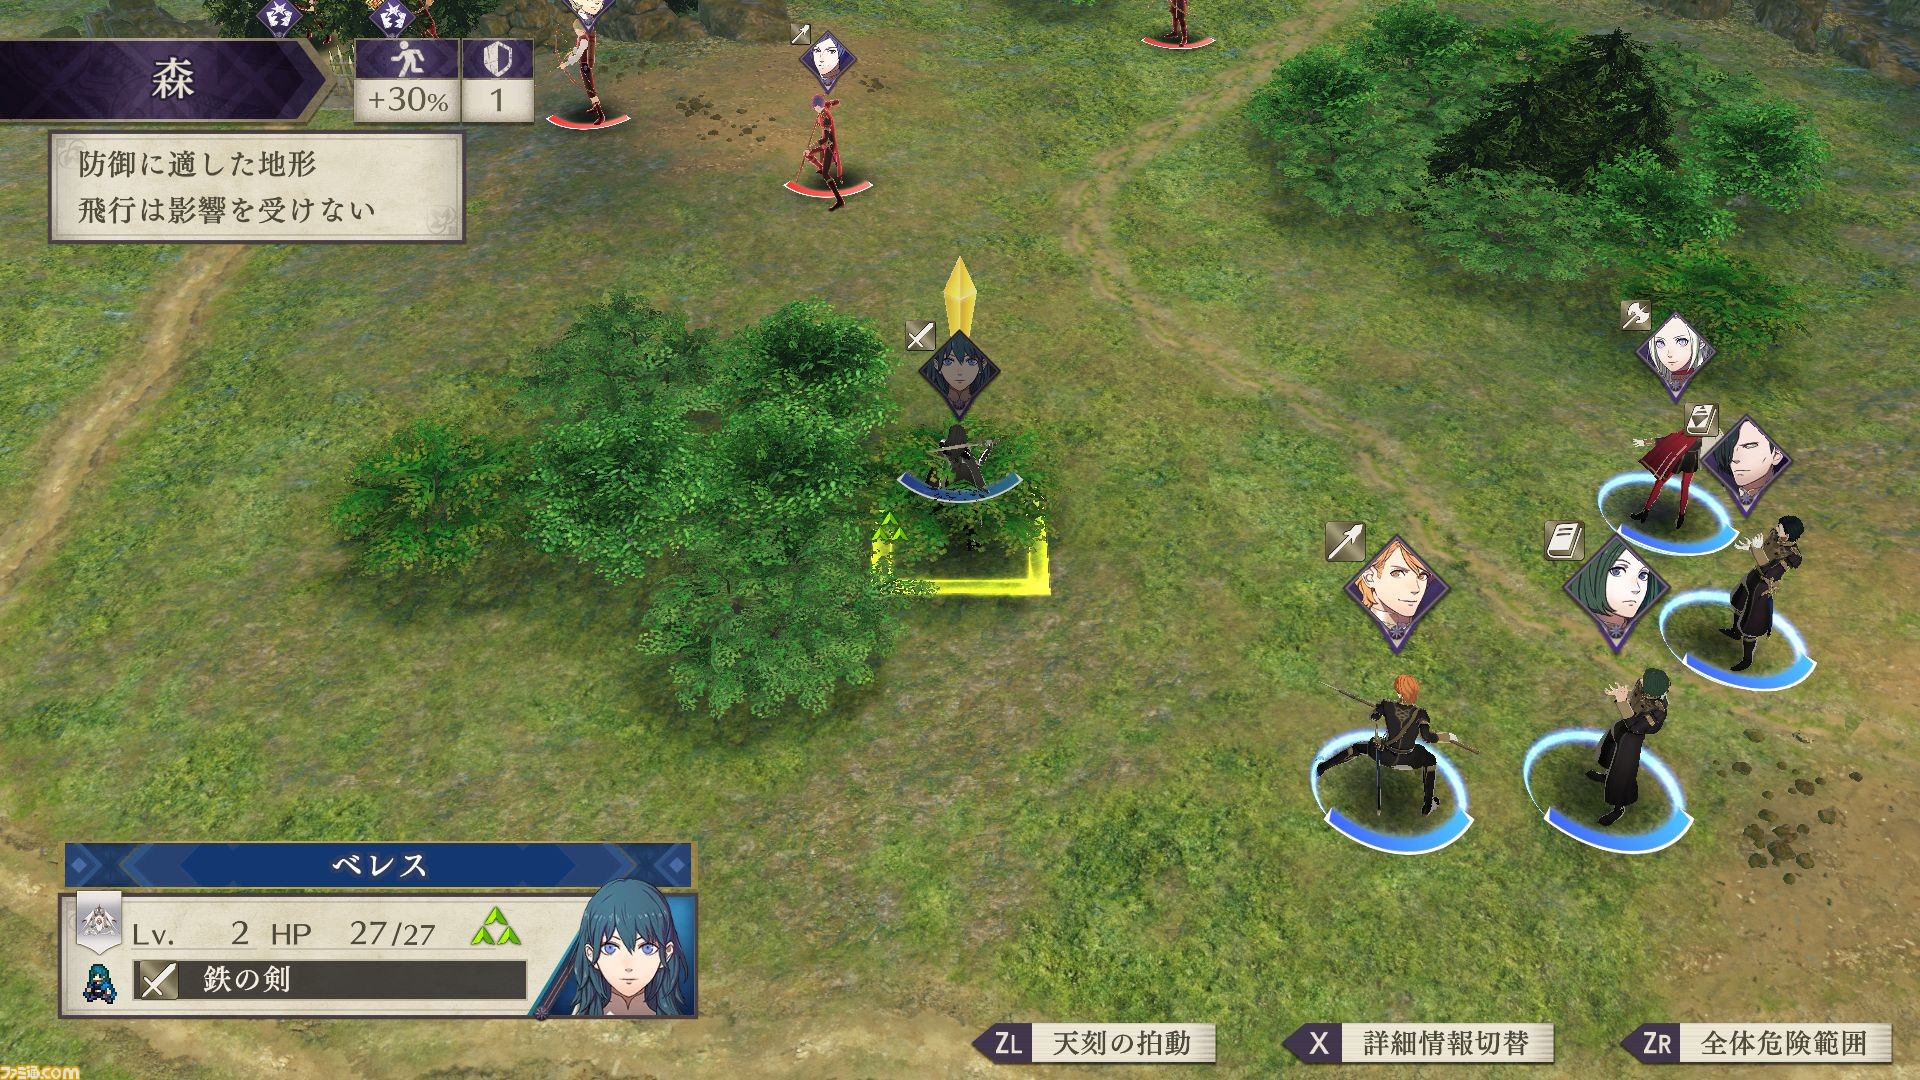 https://www.perfectly-nintendo.com/wp-content/uploads/sites/1/nggallery/fire-emblem-three-houses-25-04-2019-1/51.jpg